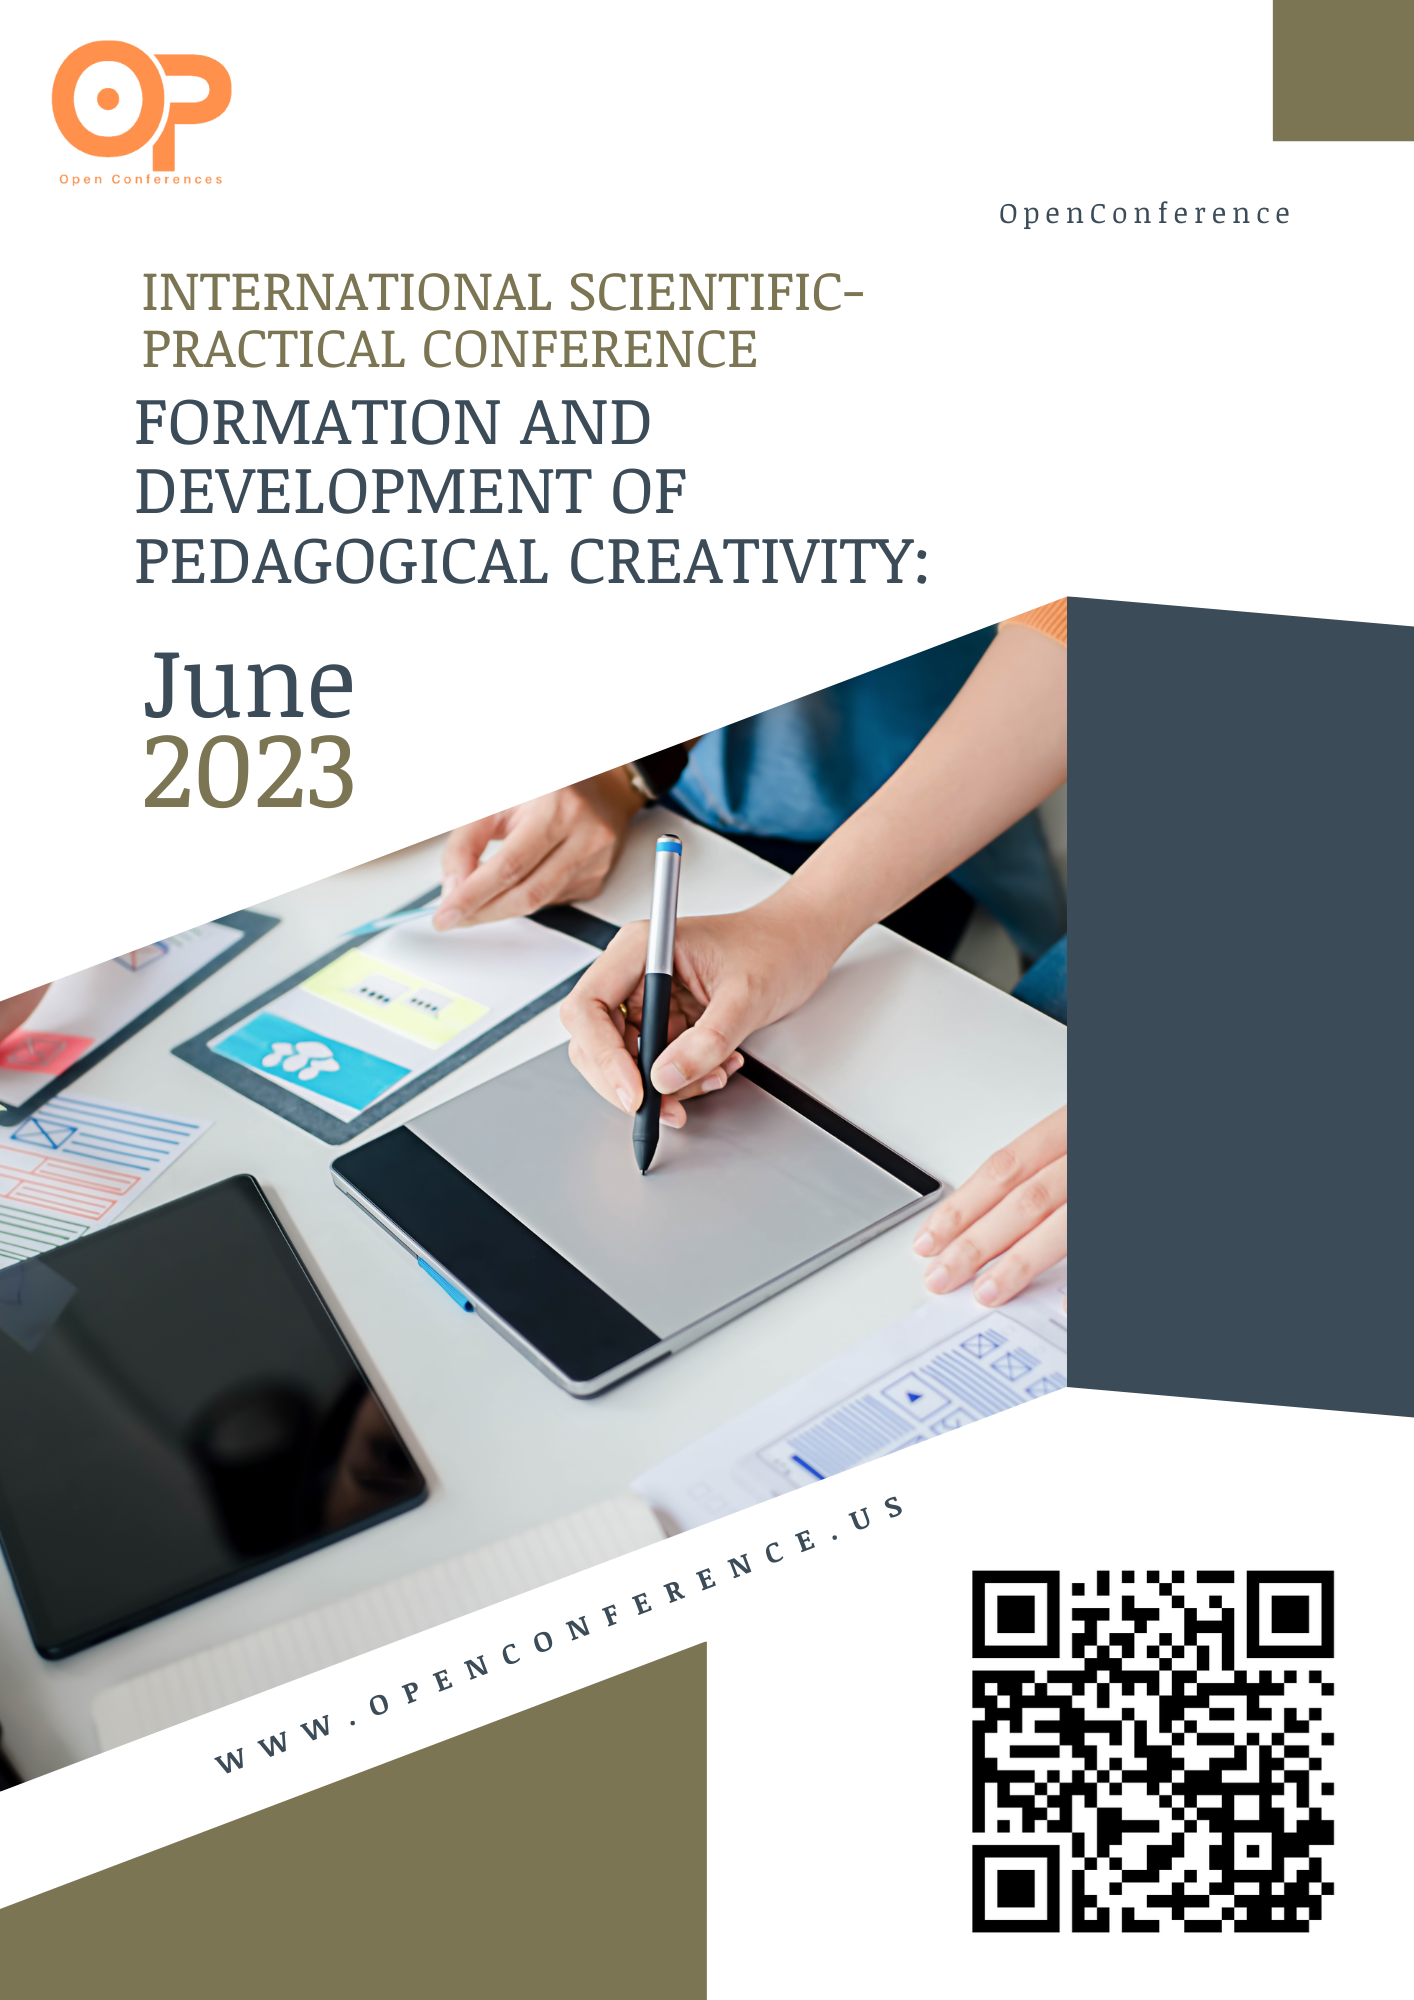  Formation and Development of Pedagogical Creativity: International Scientific-Practical Conference